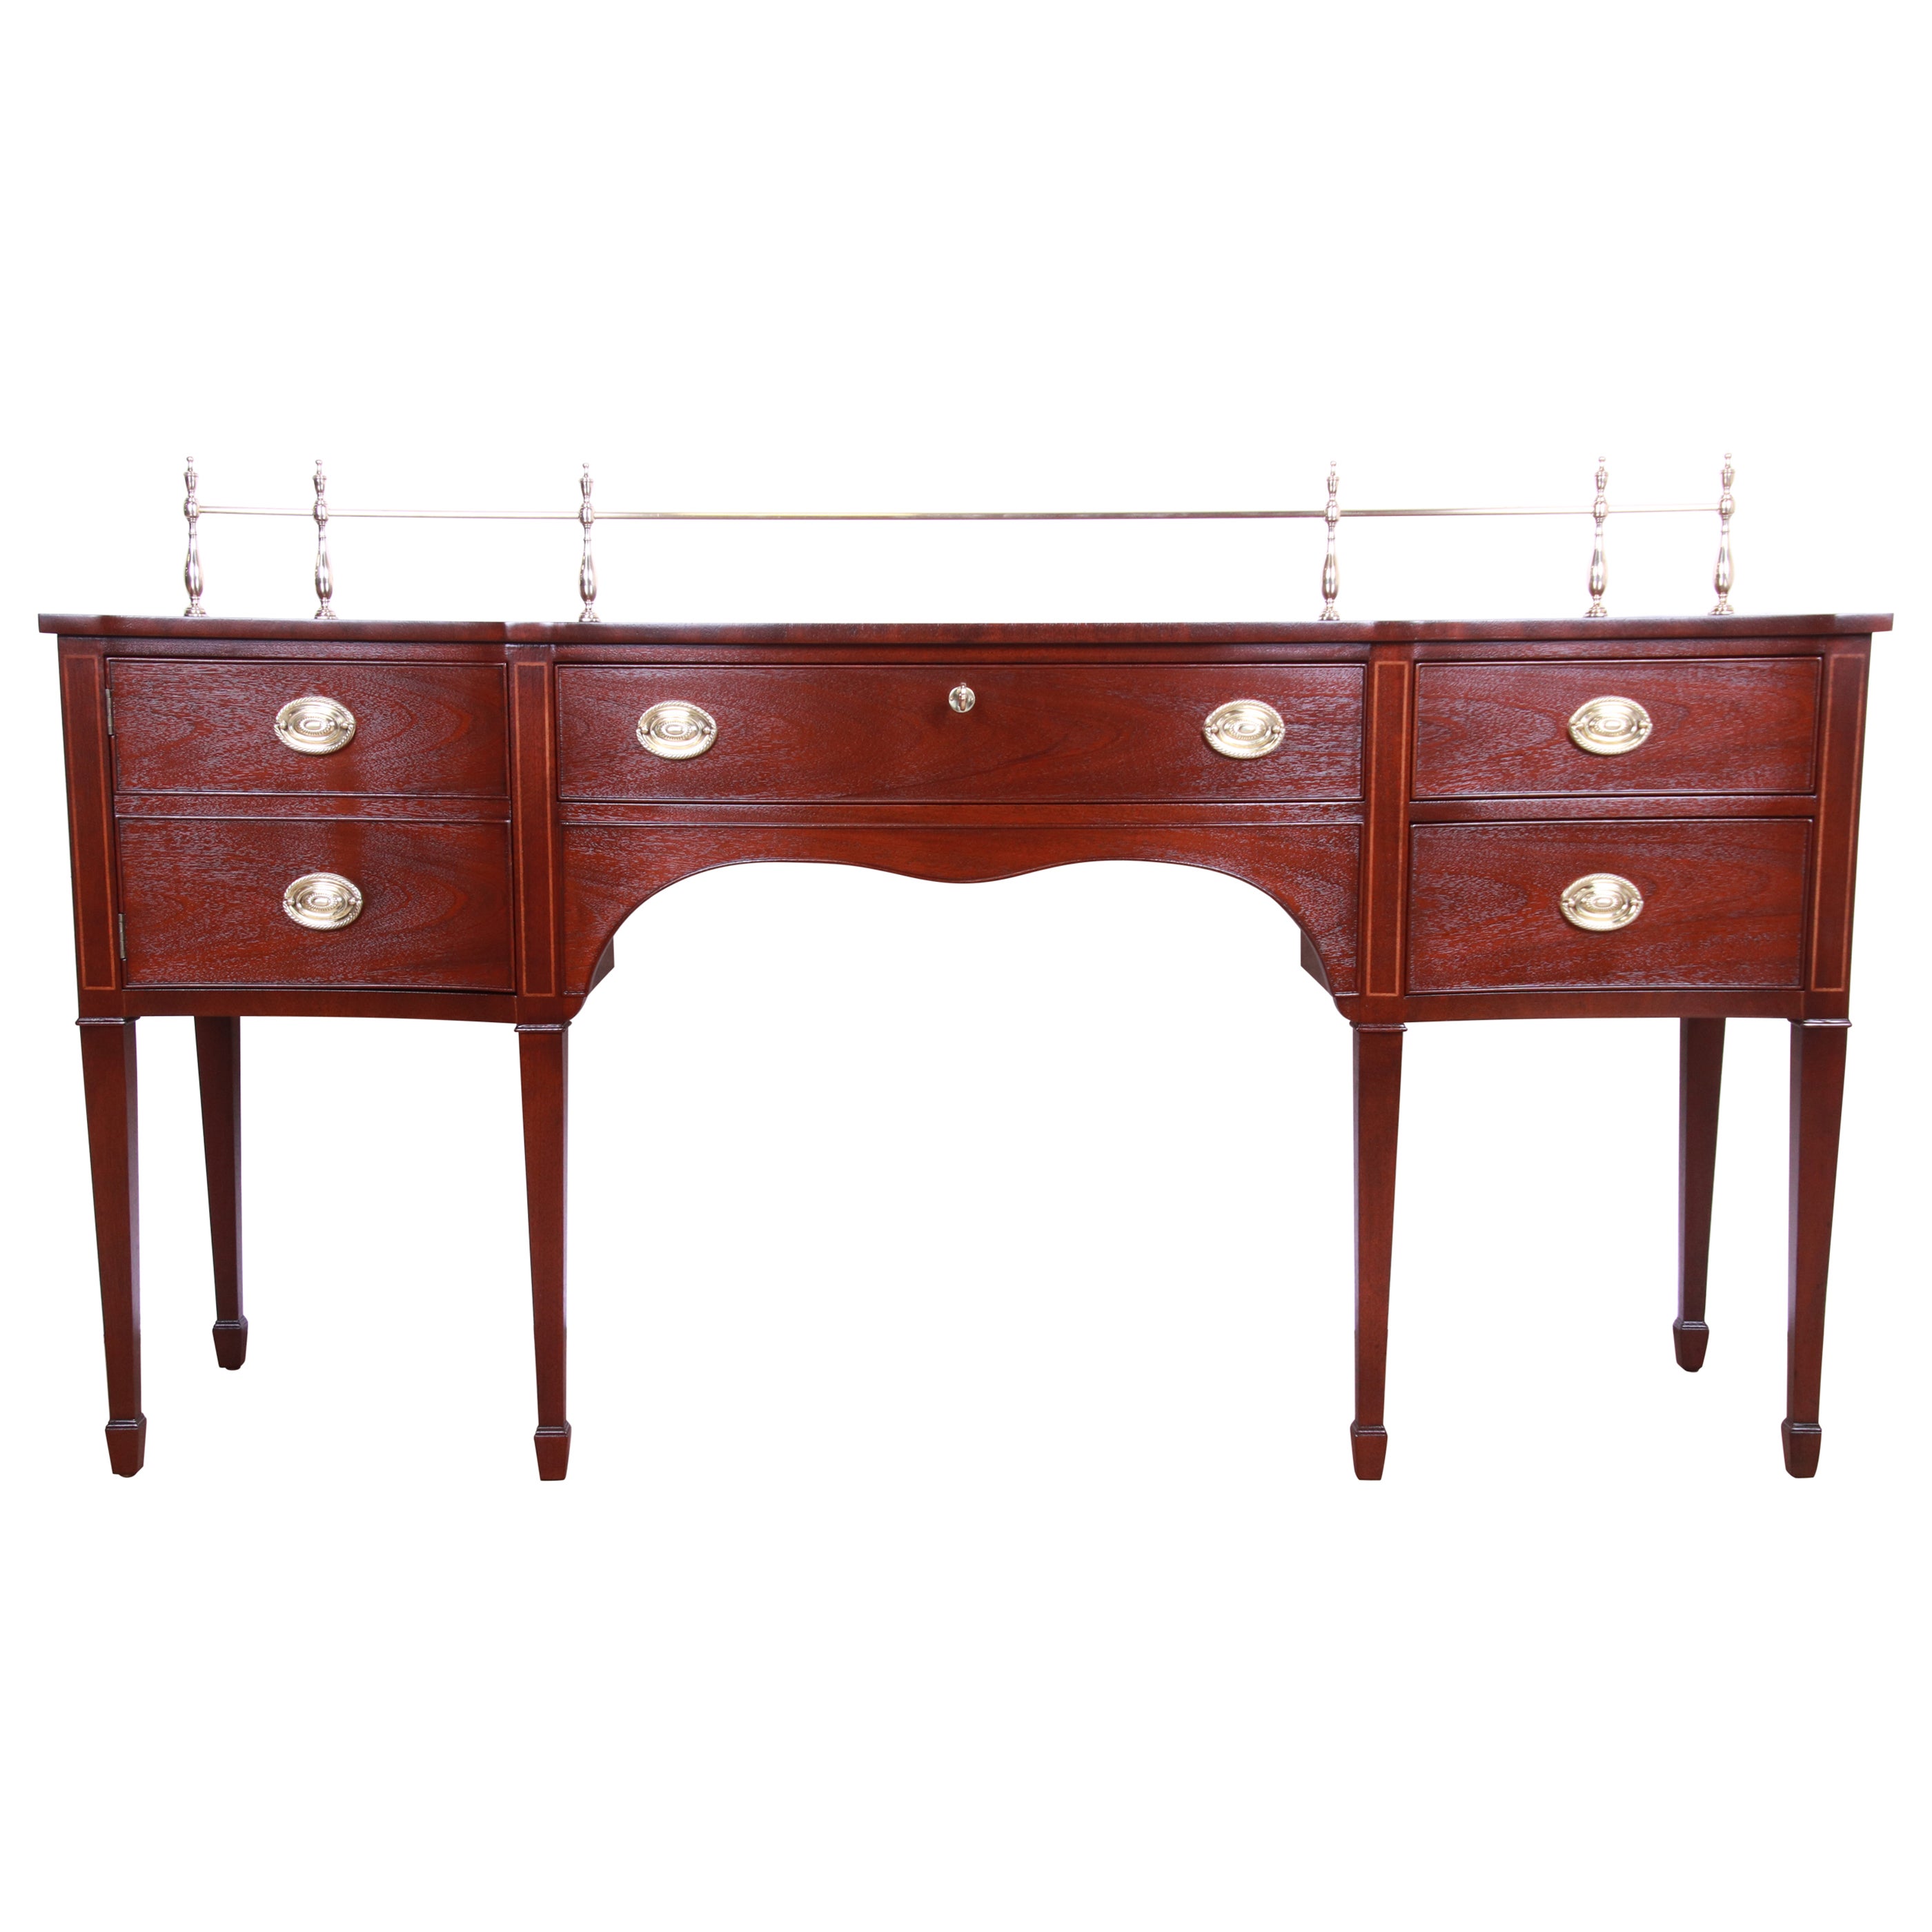 Kindel Furniture Federal Mahogany Sideboard with Brass Gallery, Newly Refinished